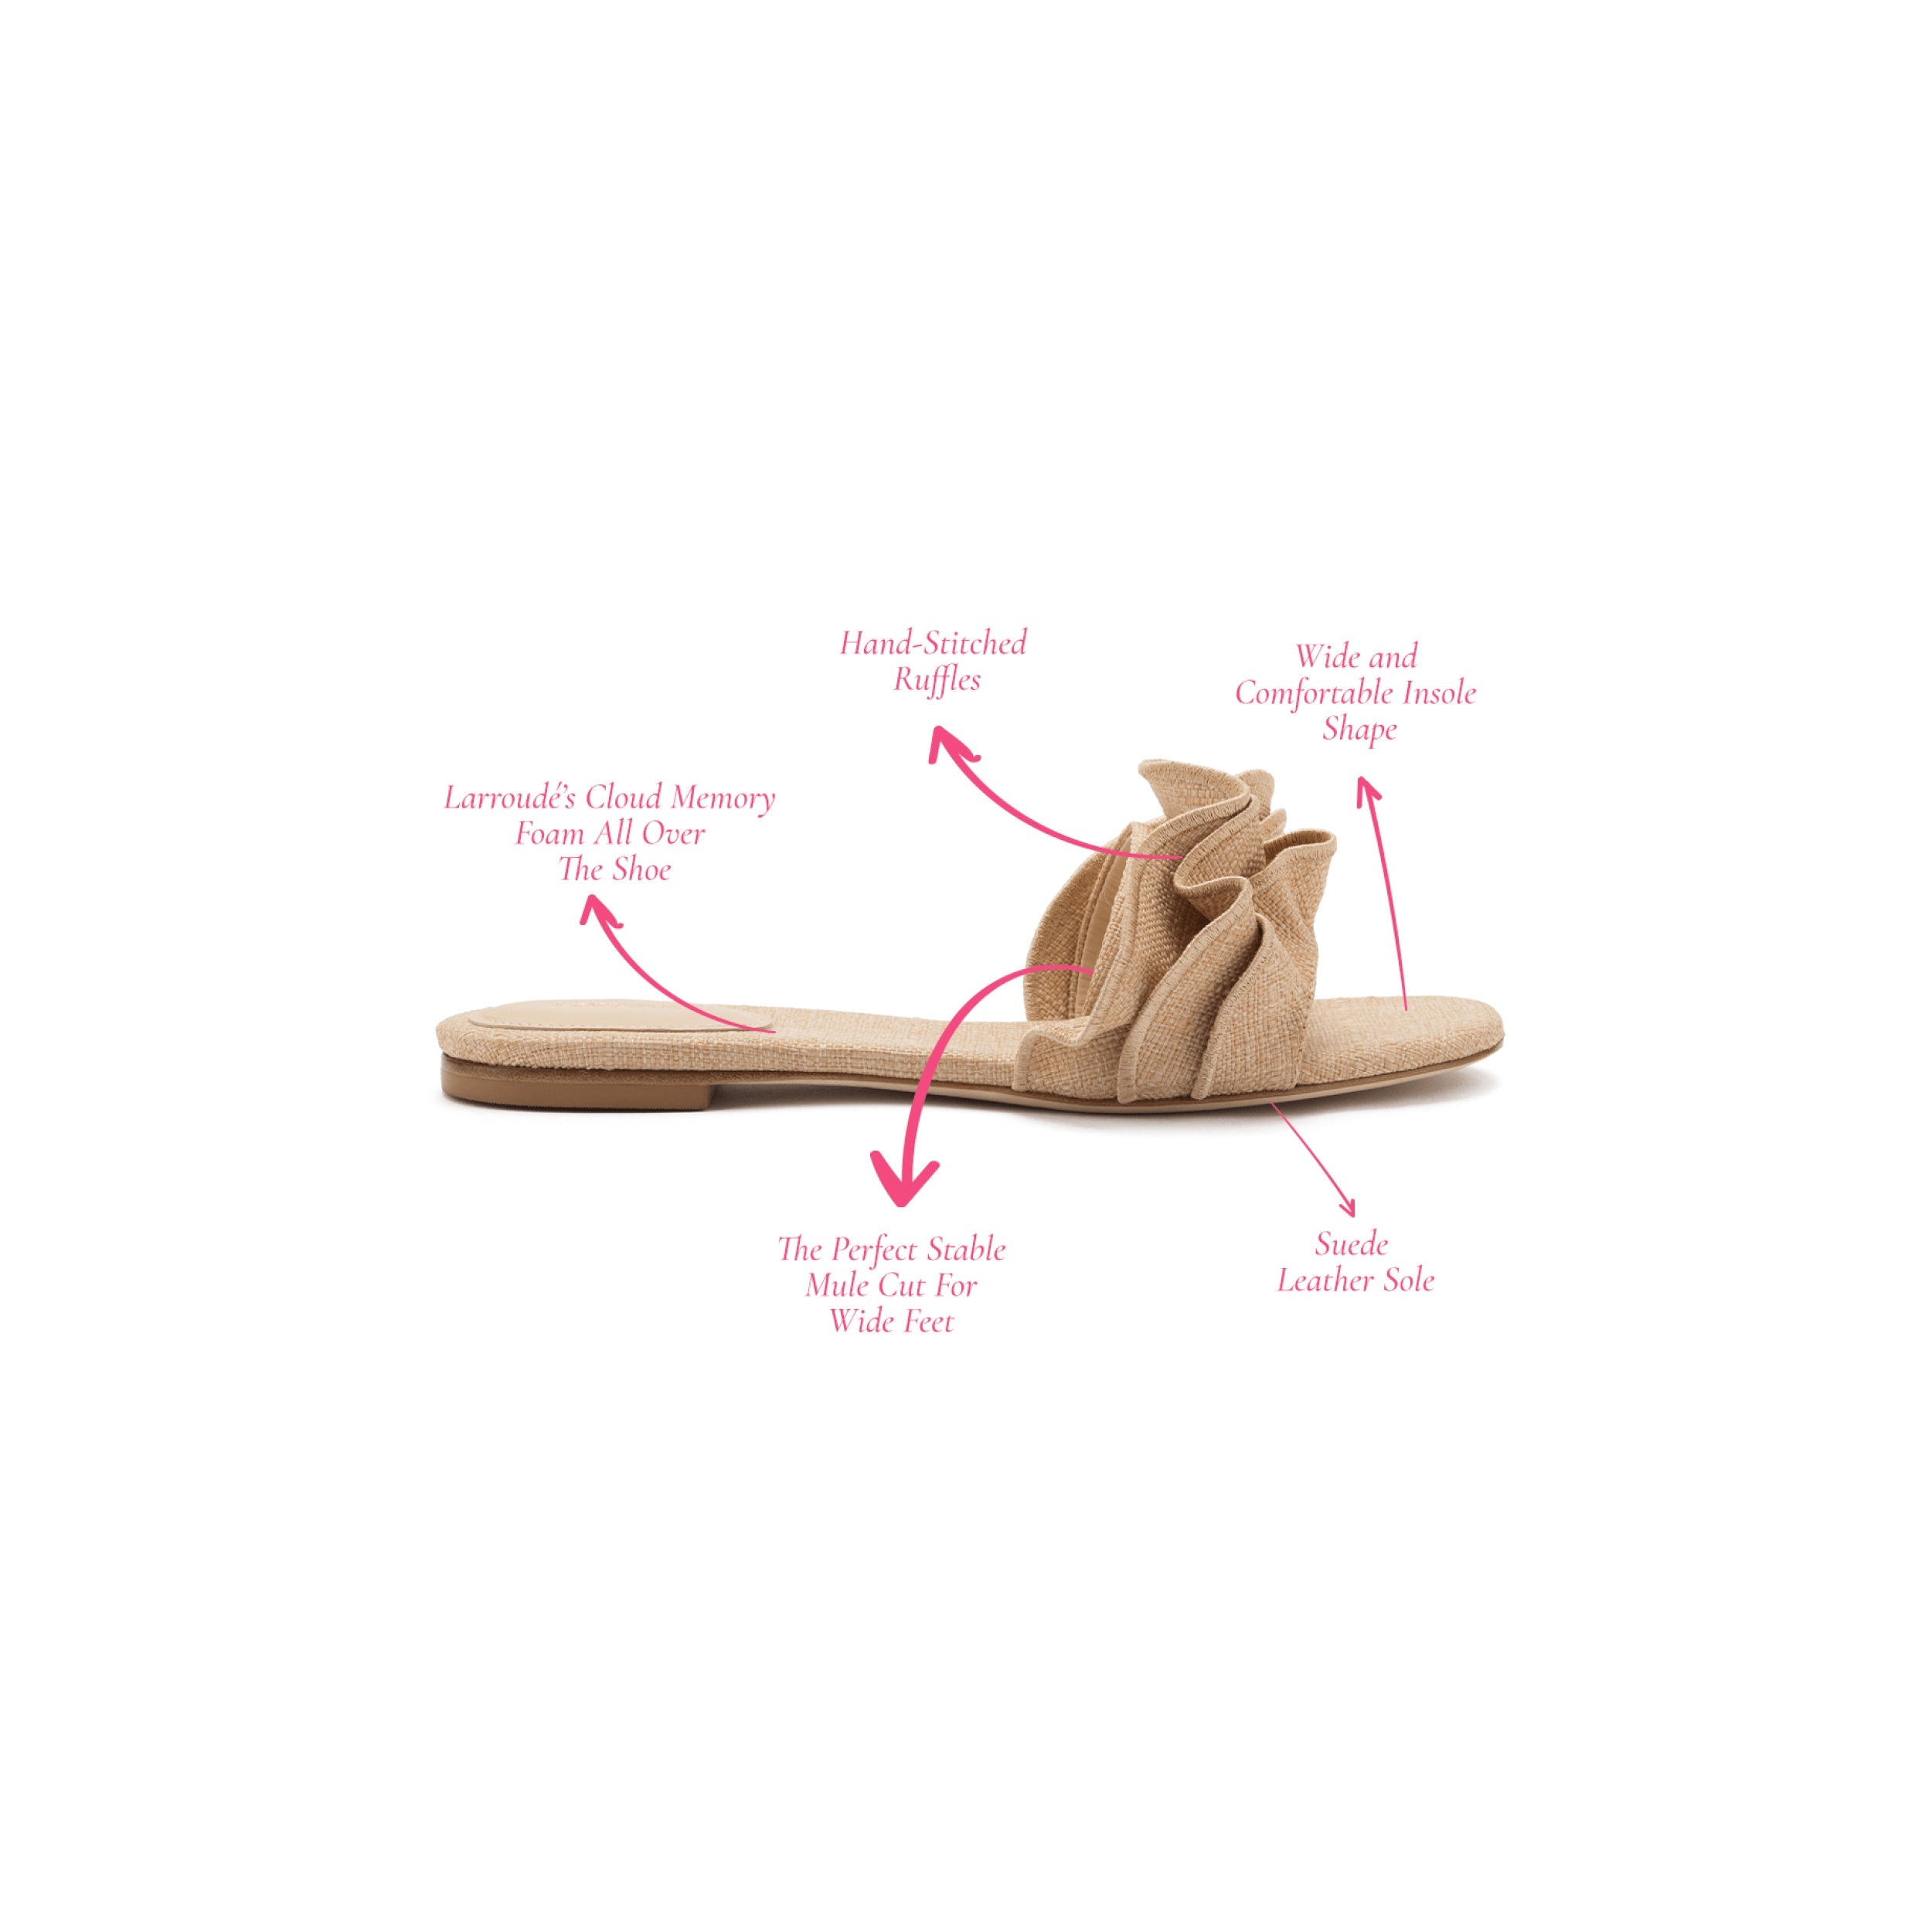 A side view of the beige Ivy Ruffle Flat Mule in Raffia showcases hand-stitched ruffles on the upper strap. Arrows highlight features such as the suede leather sole, a wide and comfortable insole shape, a perfectly scaled mule cut for wide feet, and Larrado's cloud memory foam throughout this bestselling style.